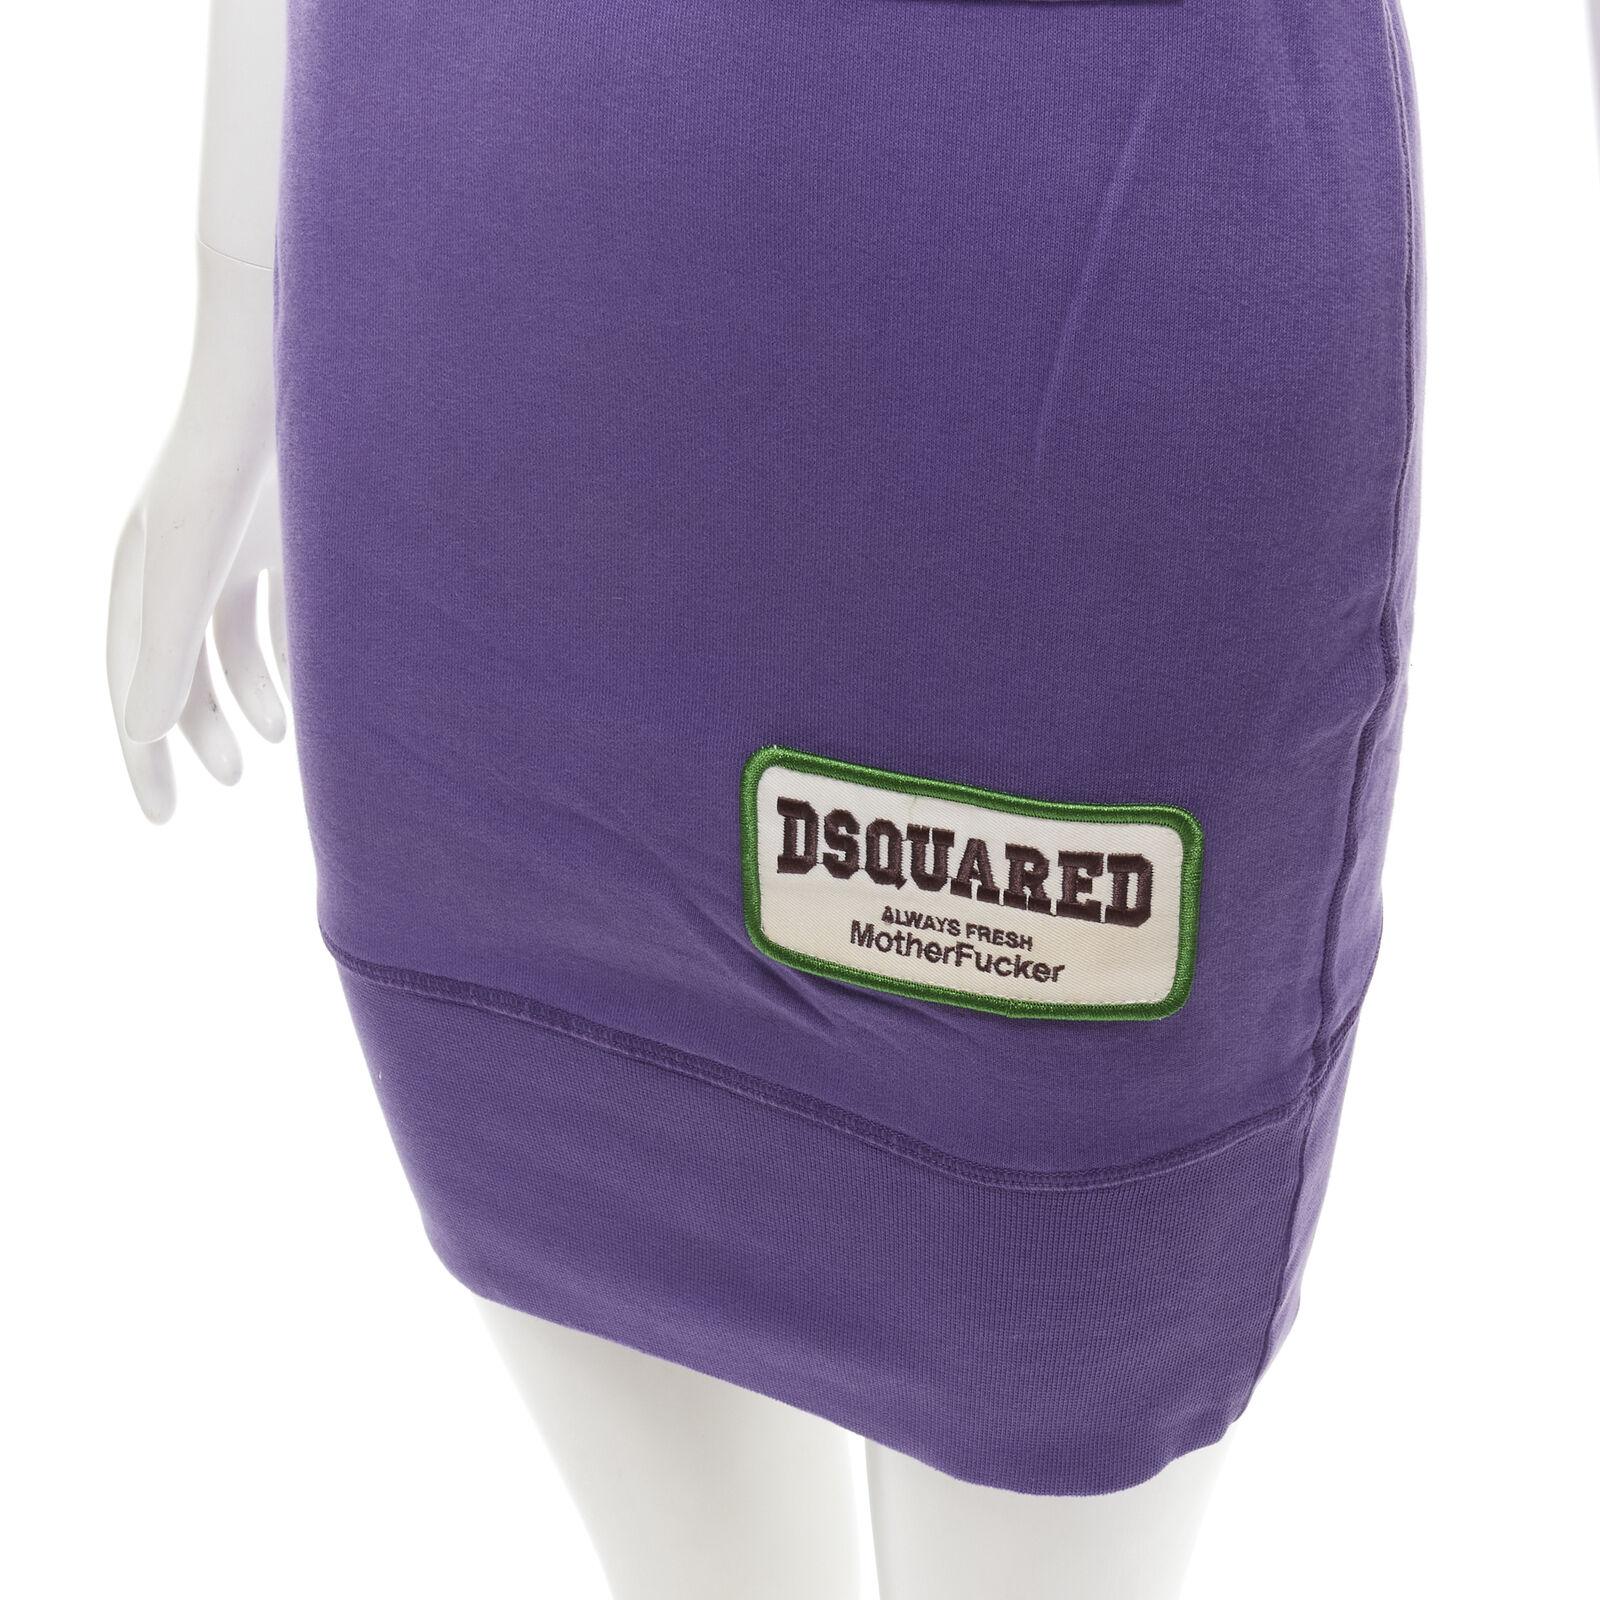 DSQUARED Vintage Runway Y2K purple cotton I Love U MotherFker strapless dress S
Reference: ANWU/A01000
Brand: Dsquared2
Collection: Runway
Material: Feels like cotton
Color: Purple
Pattern: Solid
Closure: Elasticated

CONDITION:
Condition: